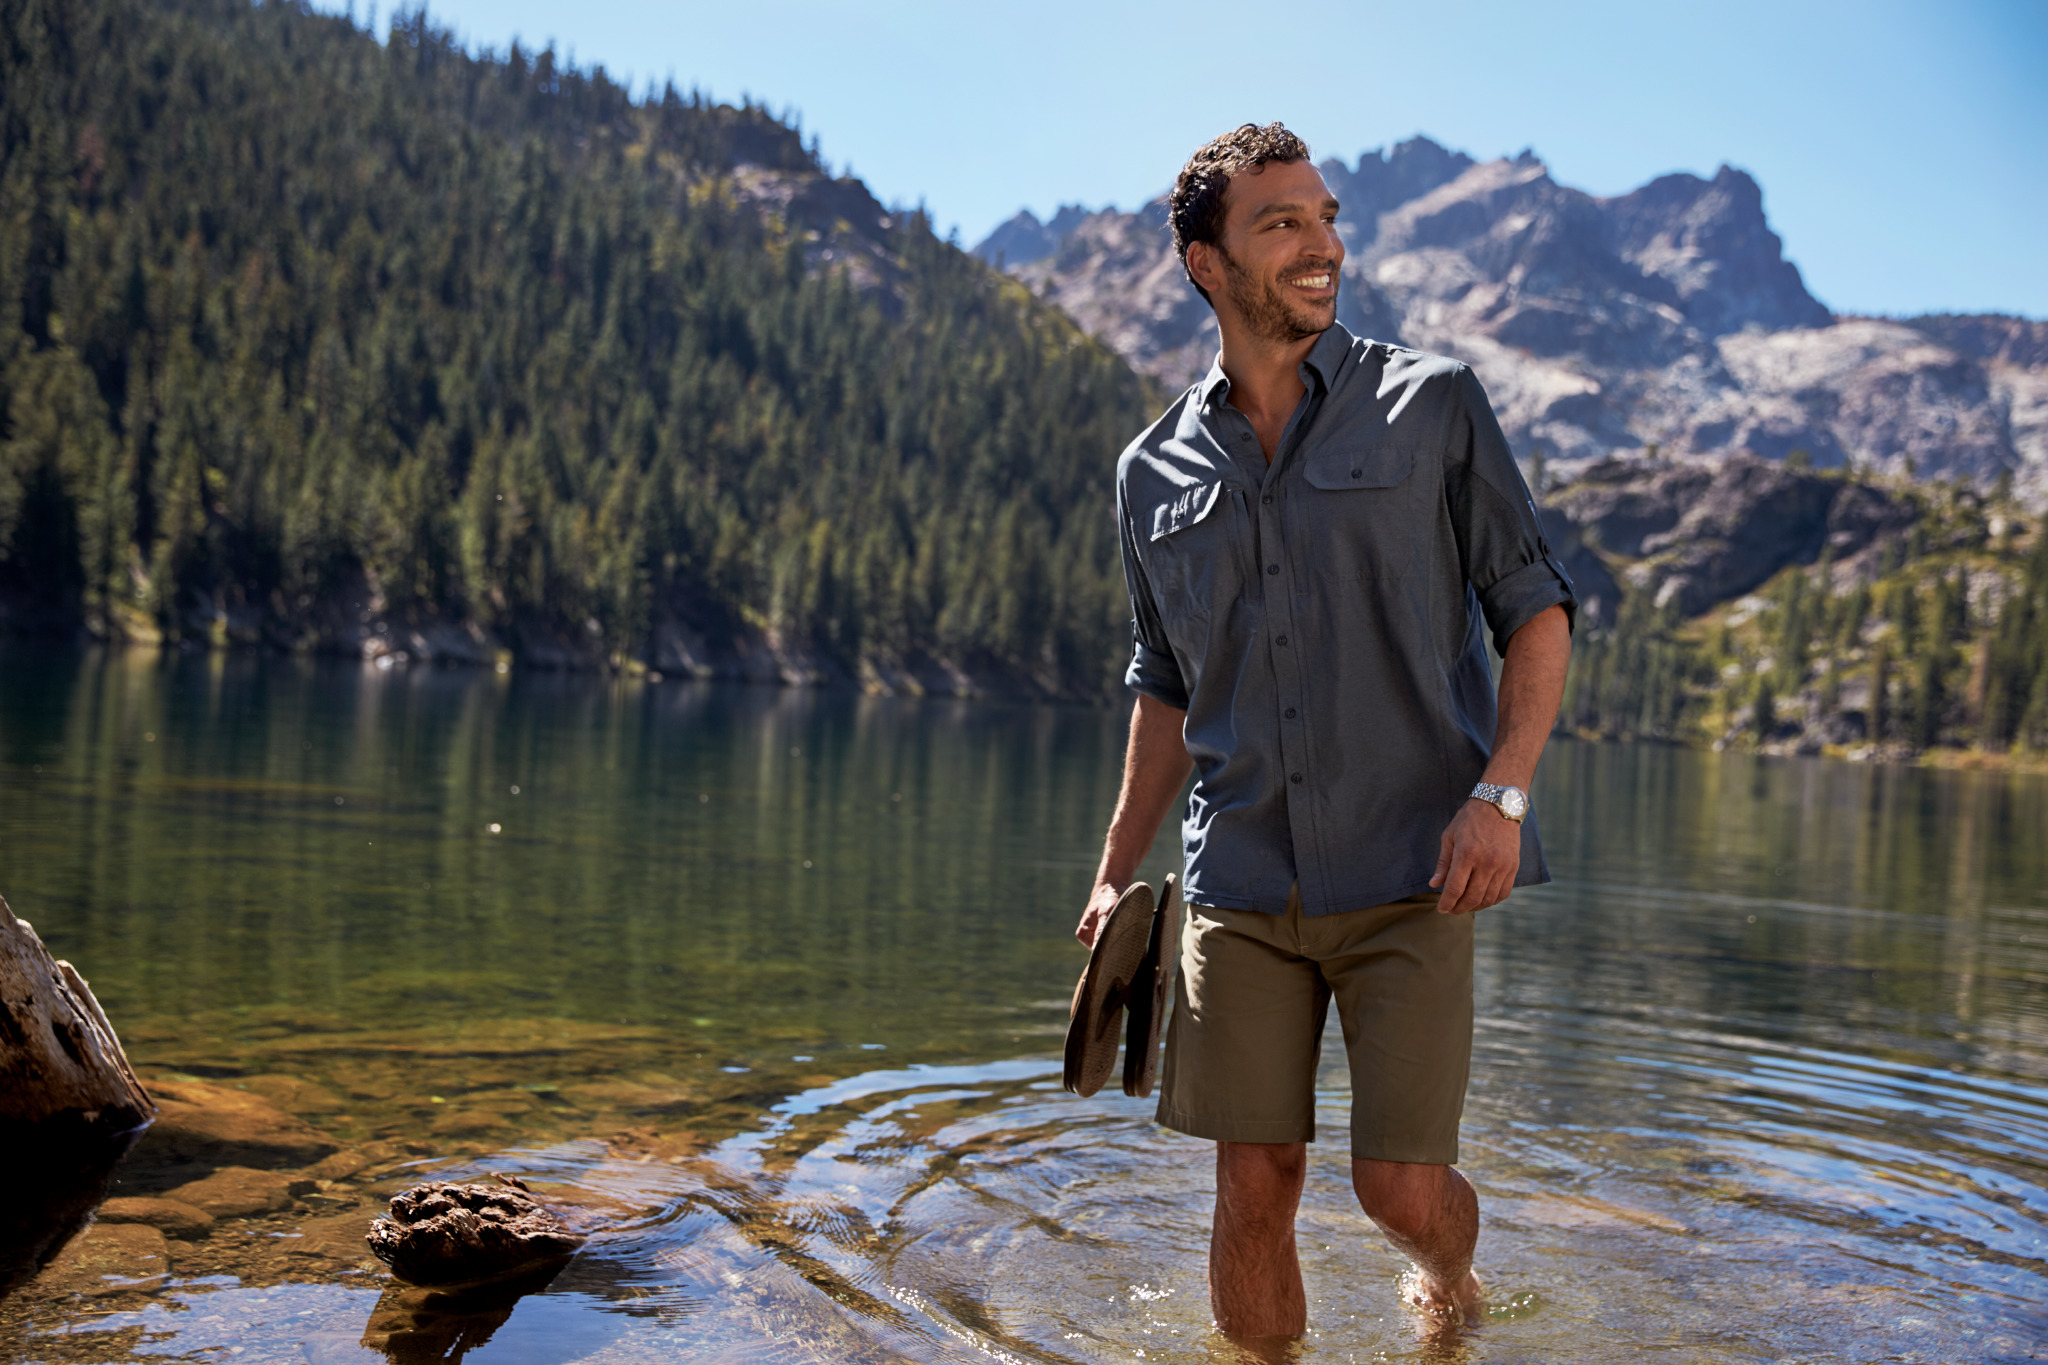 What To Wear Hiking In Summer The Ultimate Guide To Hiking Clothes - Riset